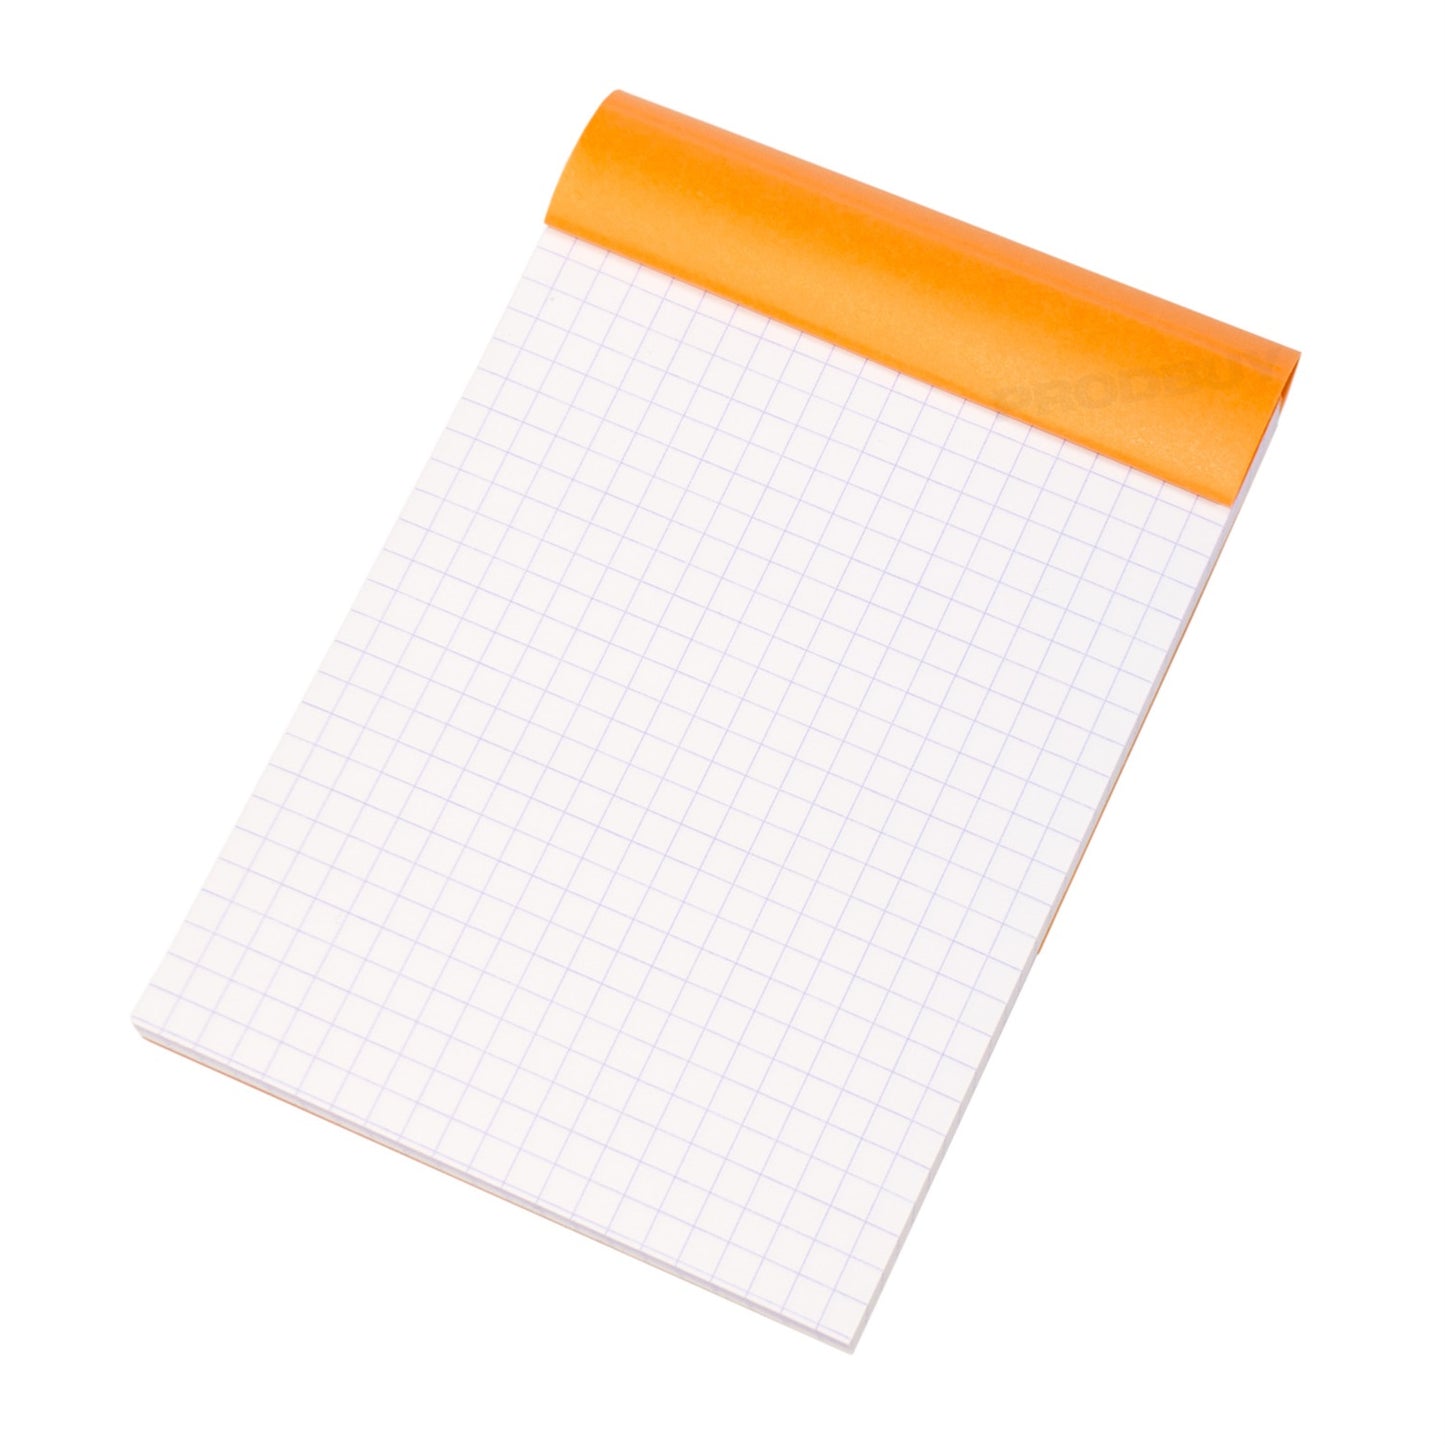 Set of 3 Rhodia A6 Notebooks with 5x5mm Square Grid Pages & Orange Covers